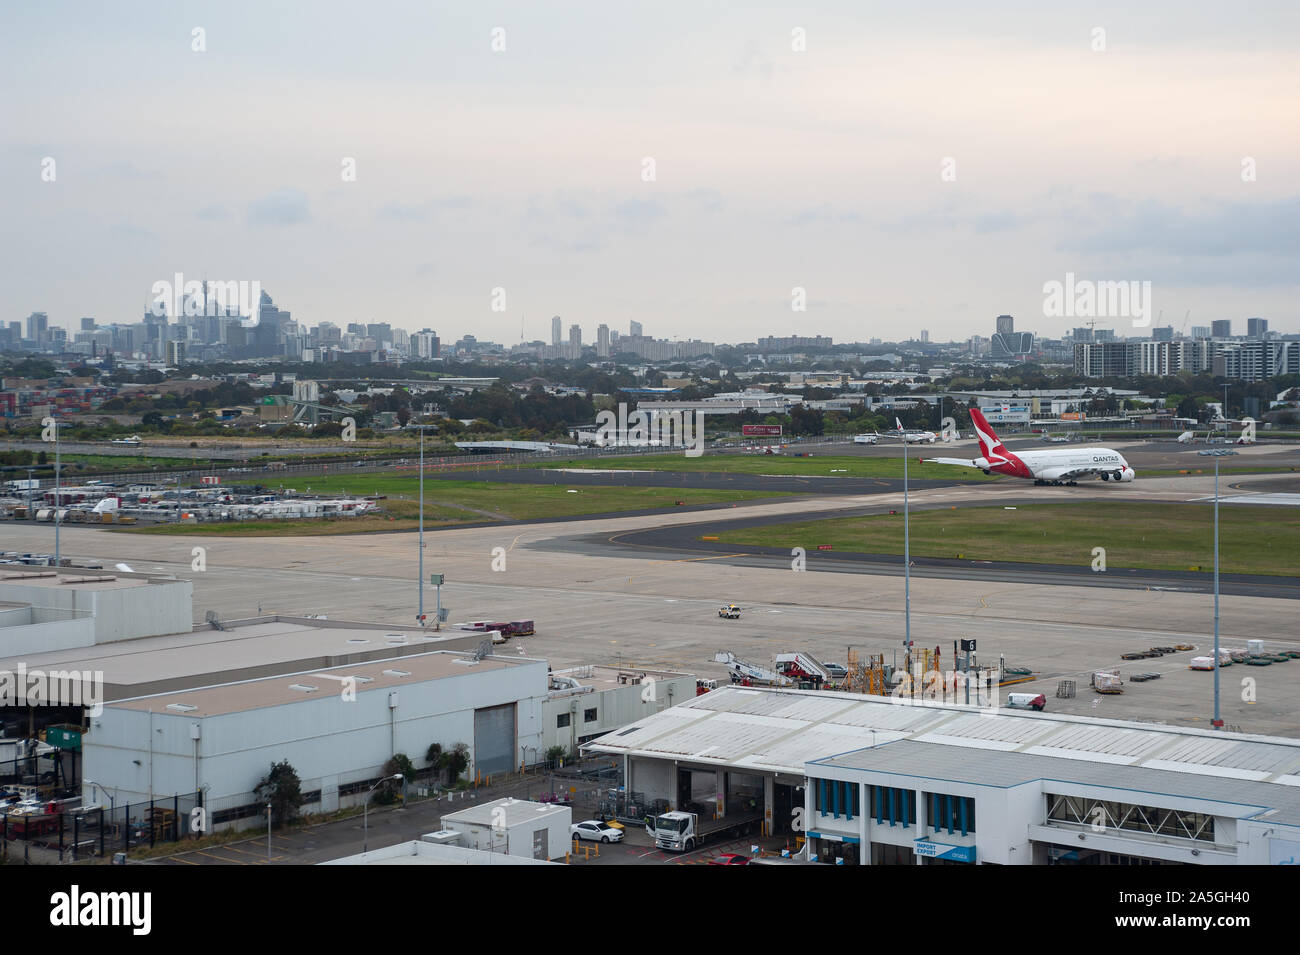 21.09.2019, Sydney, New South Wales, Australia - View from Kingsford Smith International Airport across the apron towards the city skyline of downtown. Stock Photo